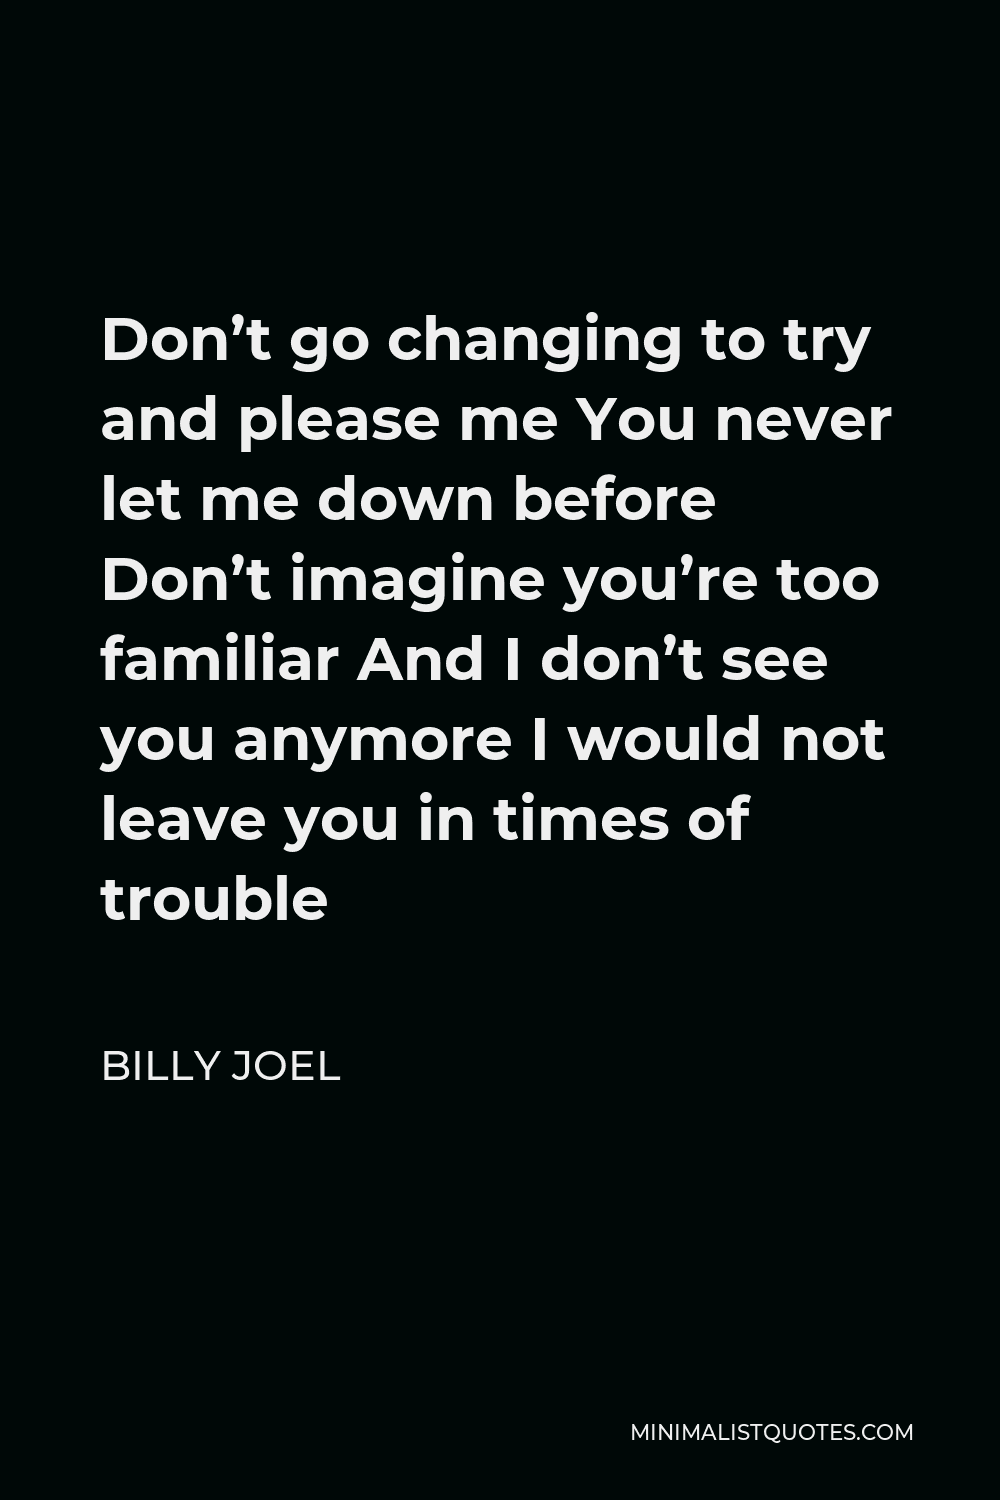 Billy Joel Quote - Don’t go changing to try and please me You never let me down before Don’t imagine you’re too familiar And I don’t see you anymore I would not leave you in times of trouble